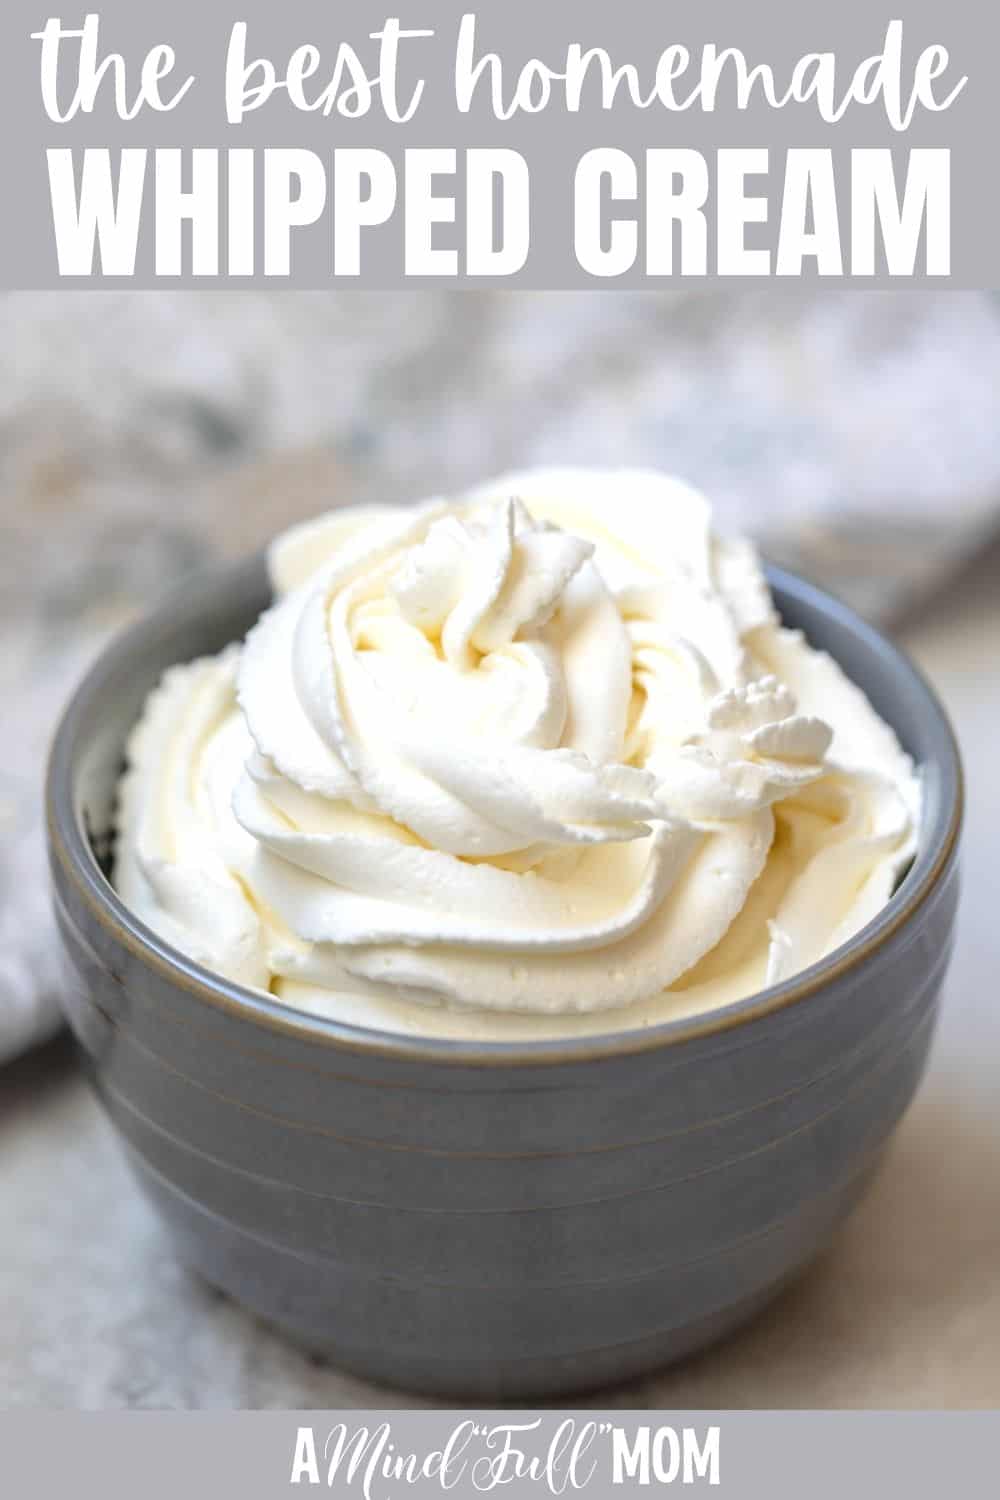 With only 3 ingredients and a few minutes of your time, you can easily make homemade whipped cream! Homemade whipped cream tastes 100% better than store-bought canned or frozen whipped cream. The texture is light, fluffy, and the taste is pure and simple.